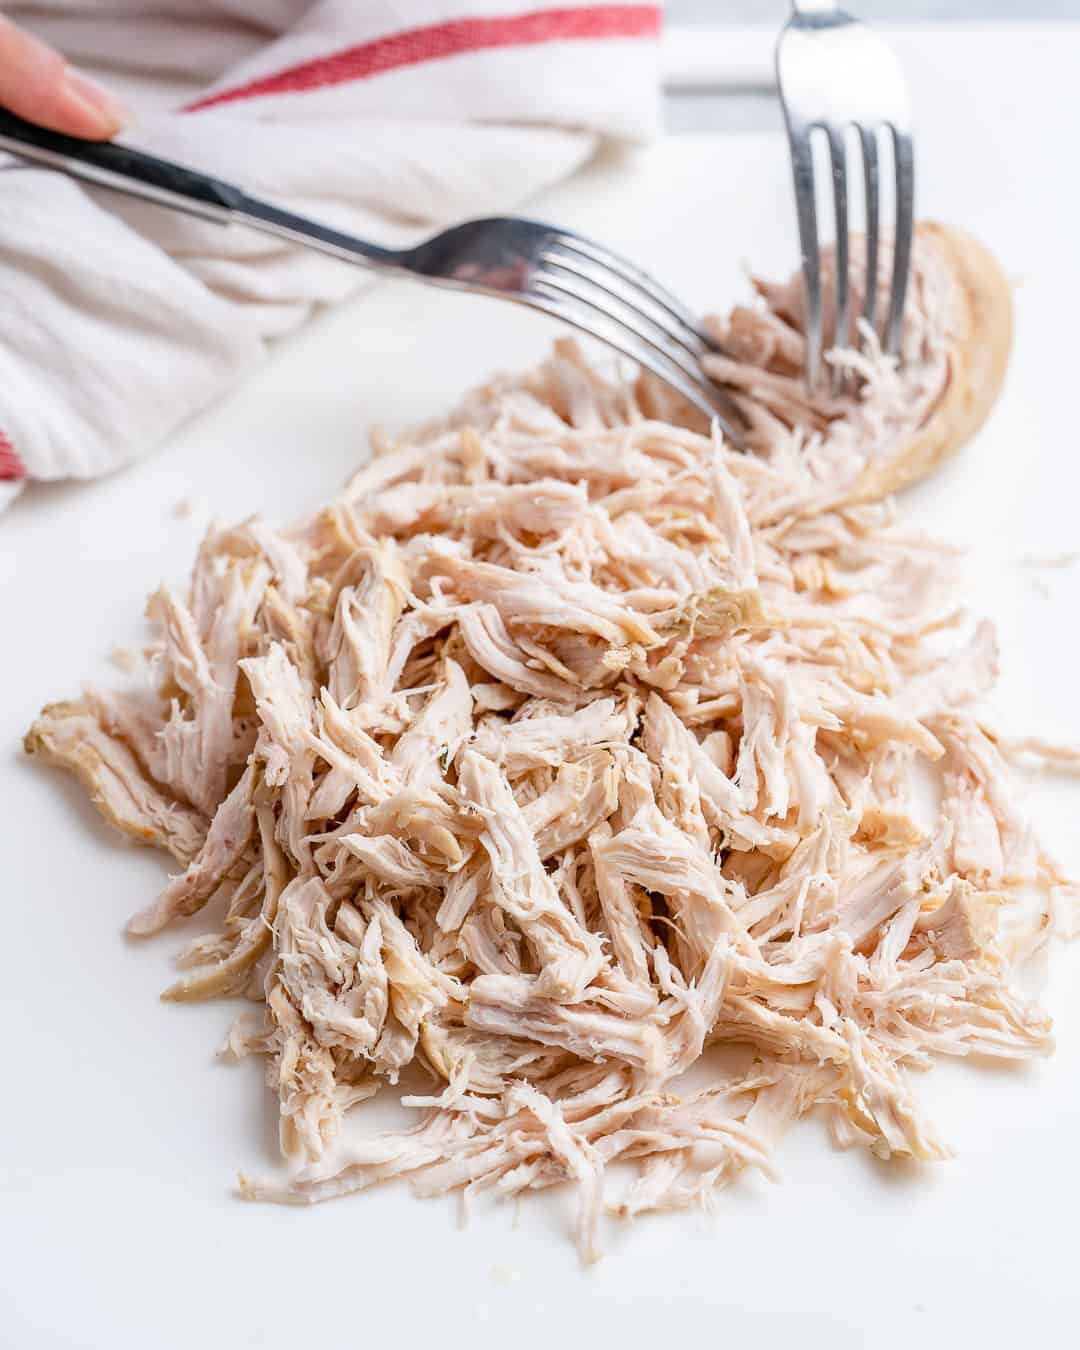 Poached chicken shredded on cutting board